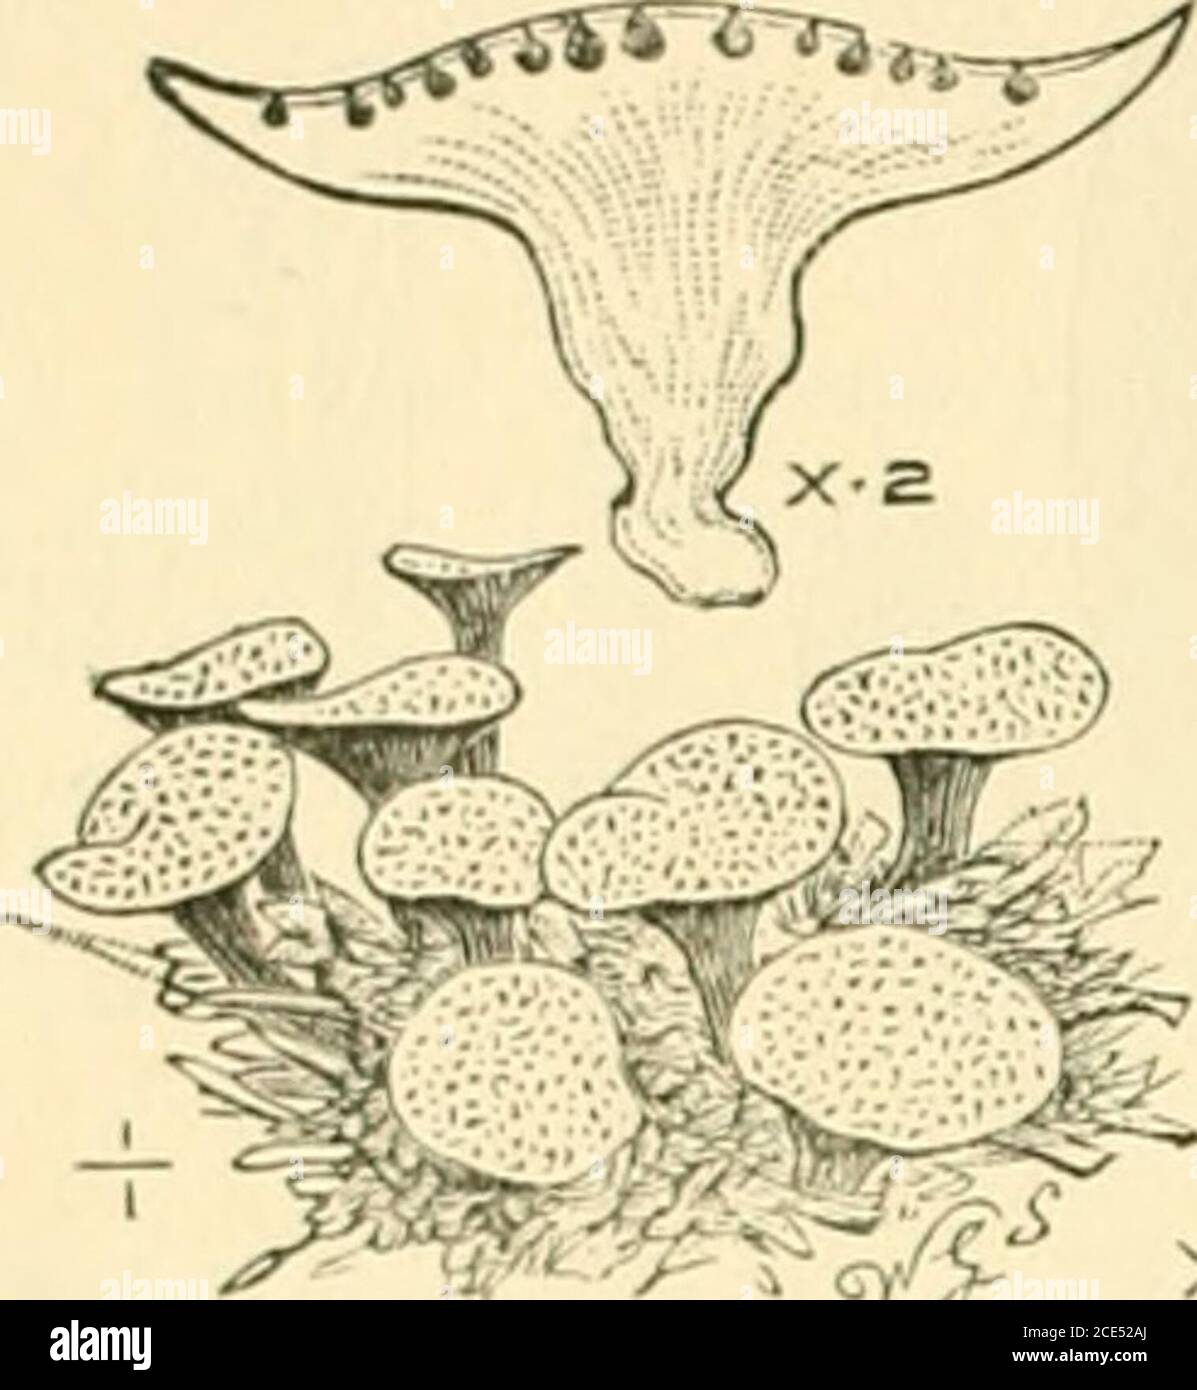 . Guide to Sowerby's models of British fungi in the Department of Botany, British Museum (Natural History) . X-400 ndral 78 GUIDE TO THE MODELS OF FUNGI. GENUS LIJ.—PORONIA Willd. Stipitate; stroma between fleshy and corky, fructifying surface discoid ; perithecia immersed. The fol-m lowing species is the only one known in^ Britain. 205. Poronia punctata Fr.—Stipi-tate, turbinate, externally blackish ; disctruncate, whitish, dotted with the blackostioles. Gregarious on horse and cow dung.. X-200 Fig. 88.—Poronia punctata Fr.(Natural size.) Section showingperithecia x 2. Ascus x 200. GENUS LIII Stock Photo